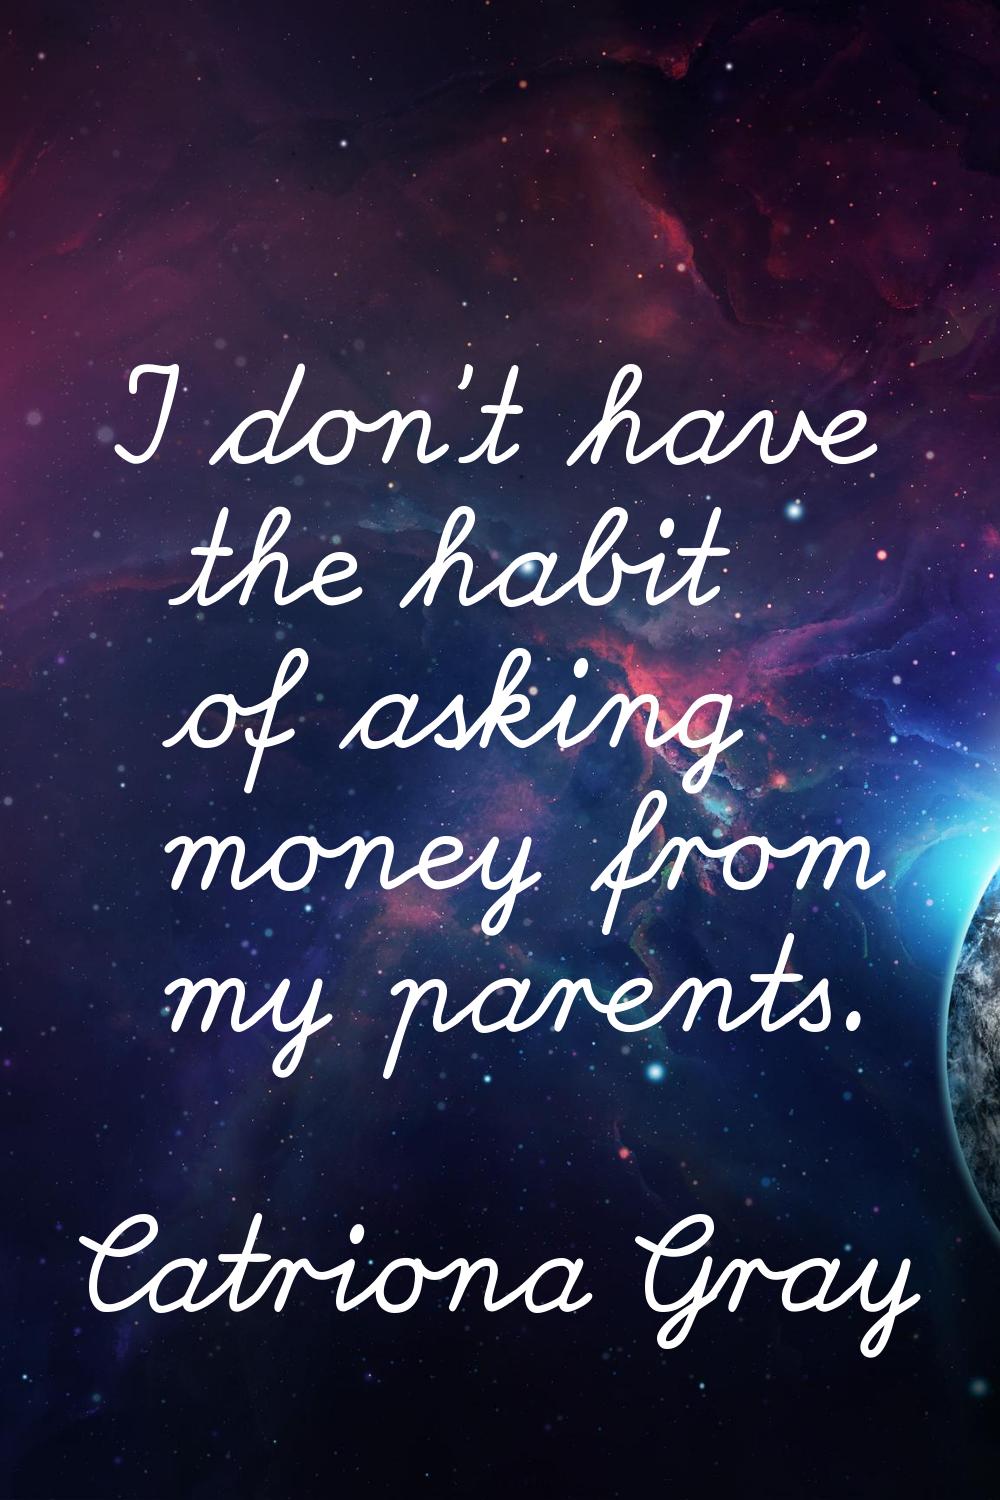 I don't have the habit of asking money from my parents.